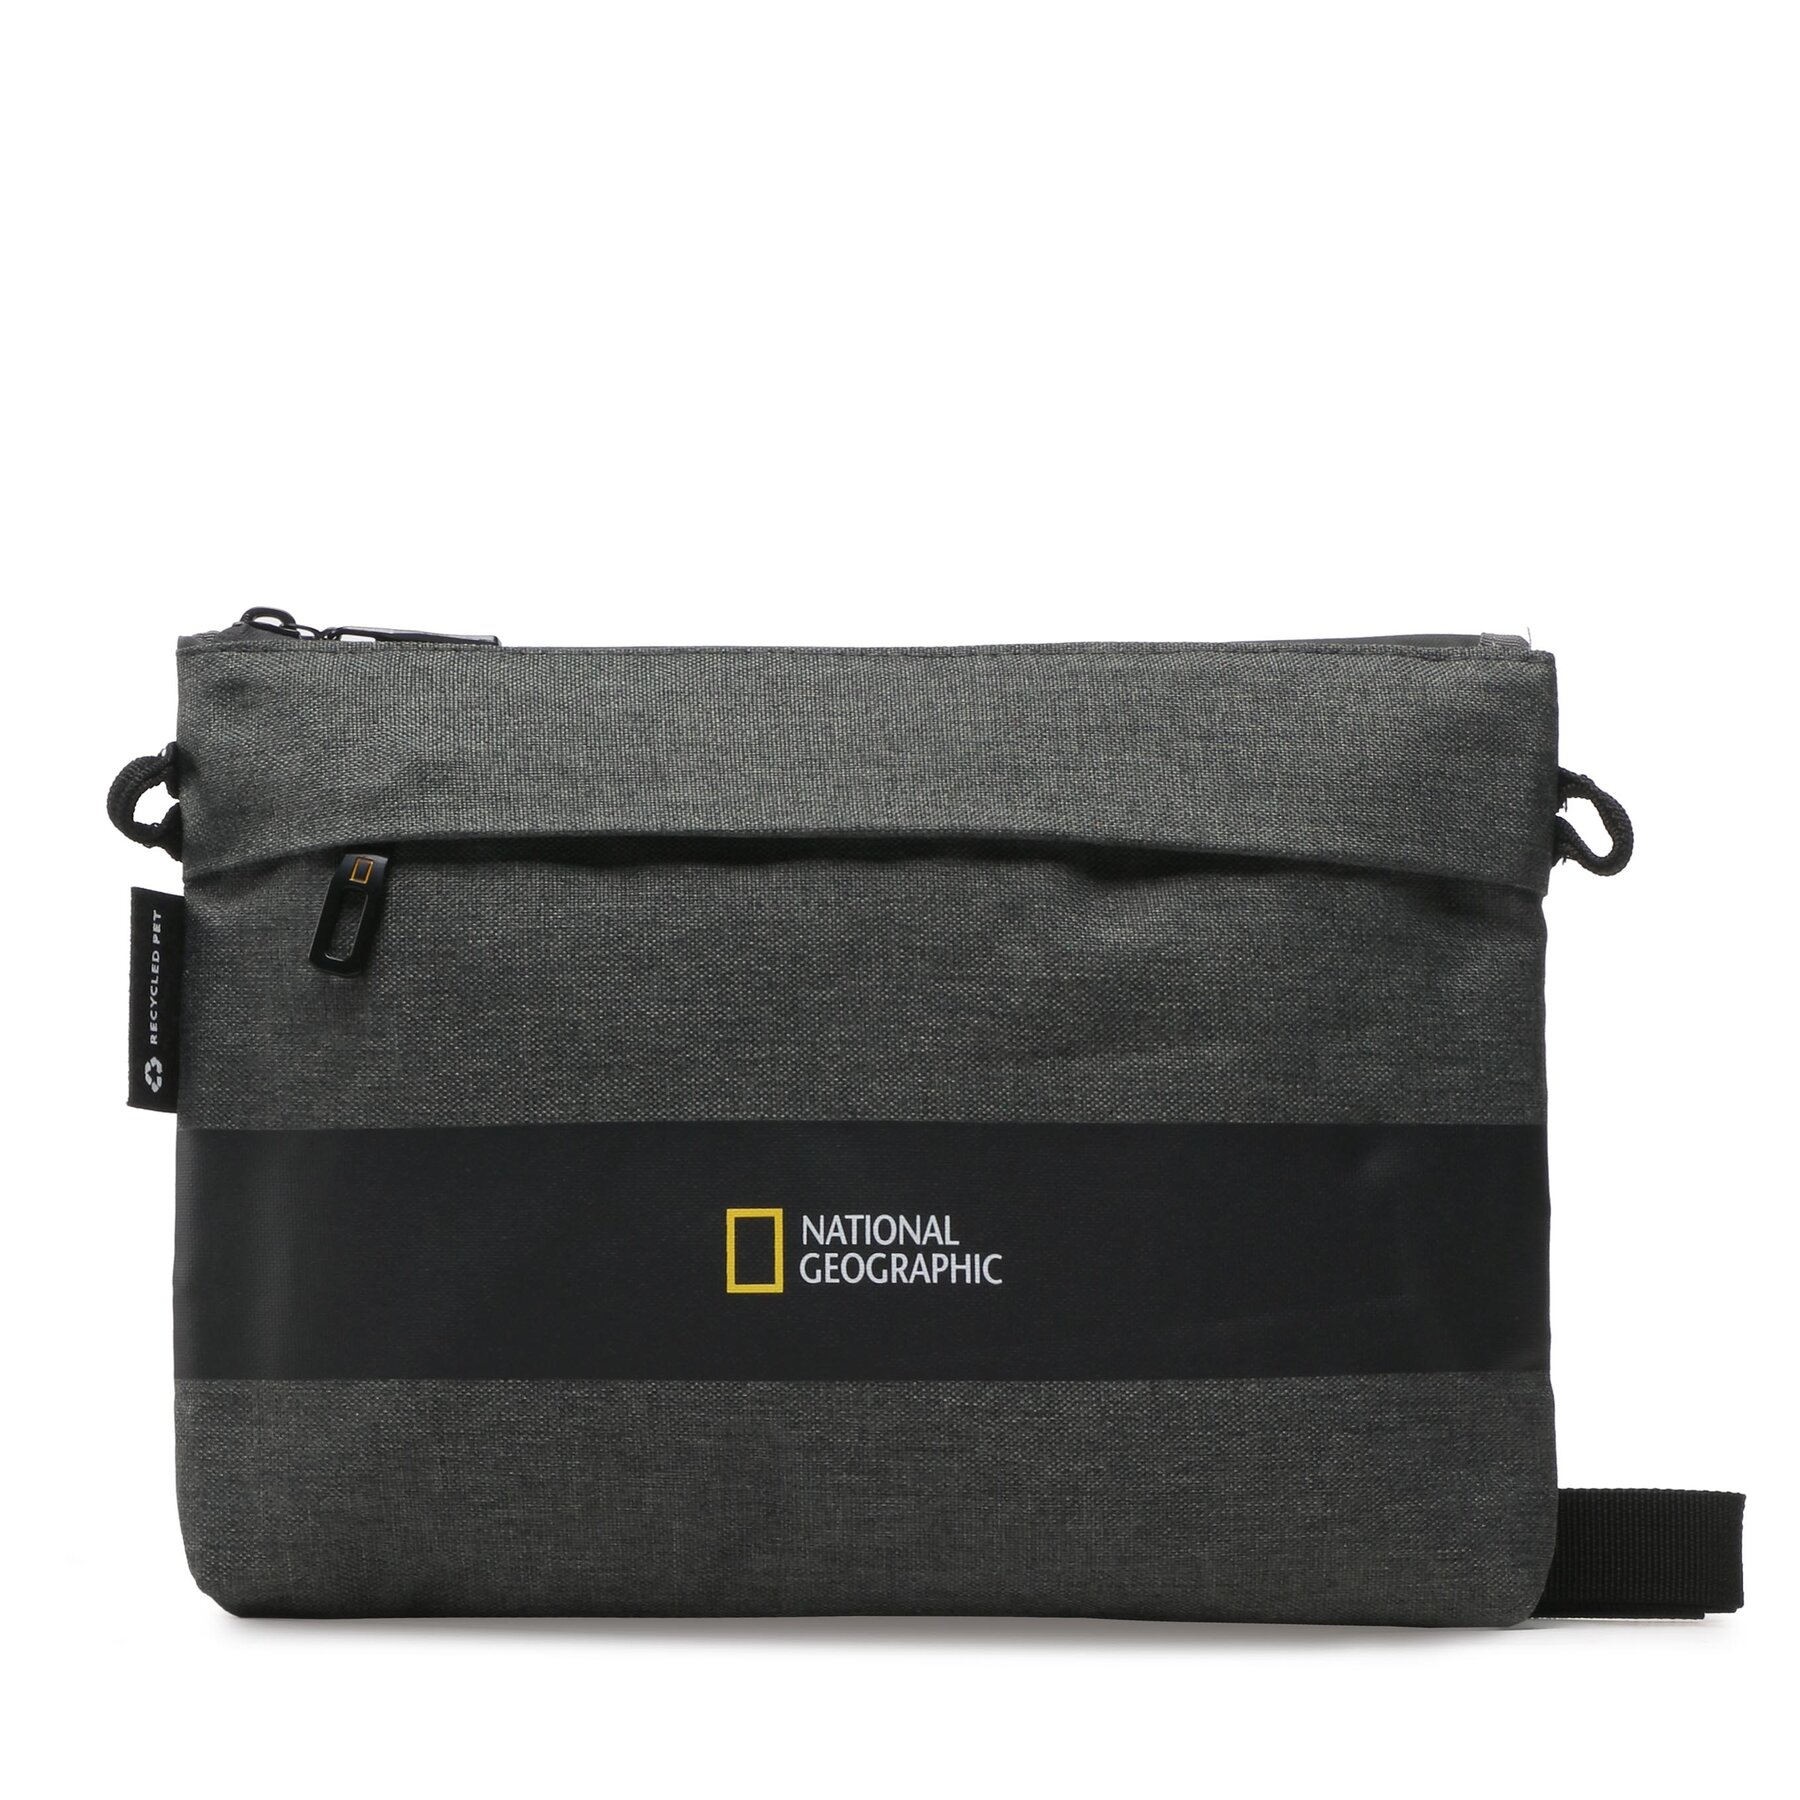 Geantă crossover National Geographic Pouch/Shoulder Bag N21105.89 Shadow Antracyt 89 Antracyt imagine noua